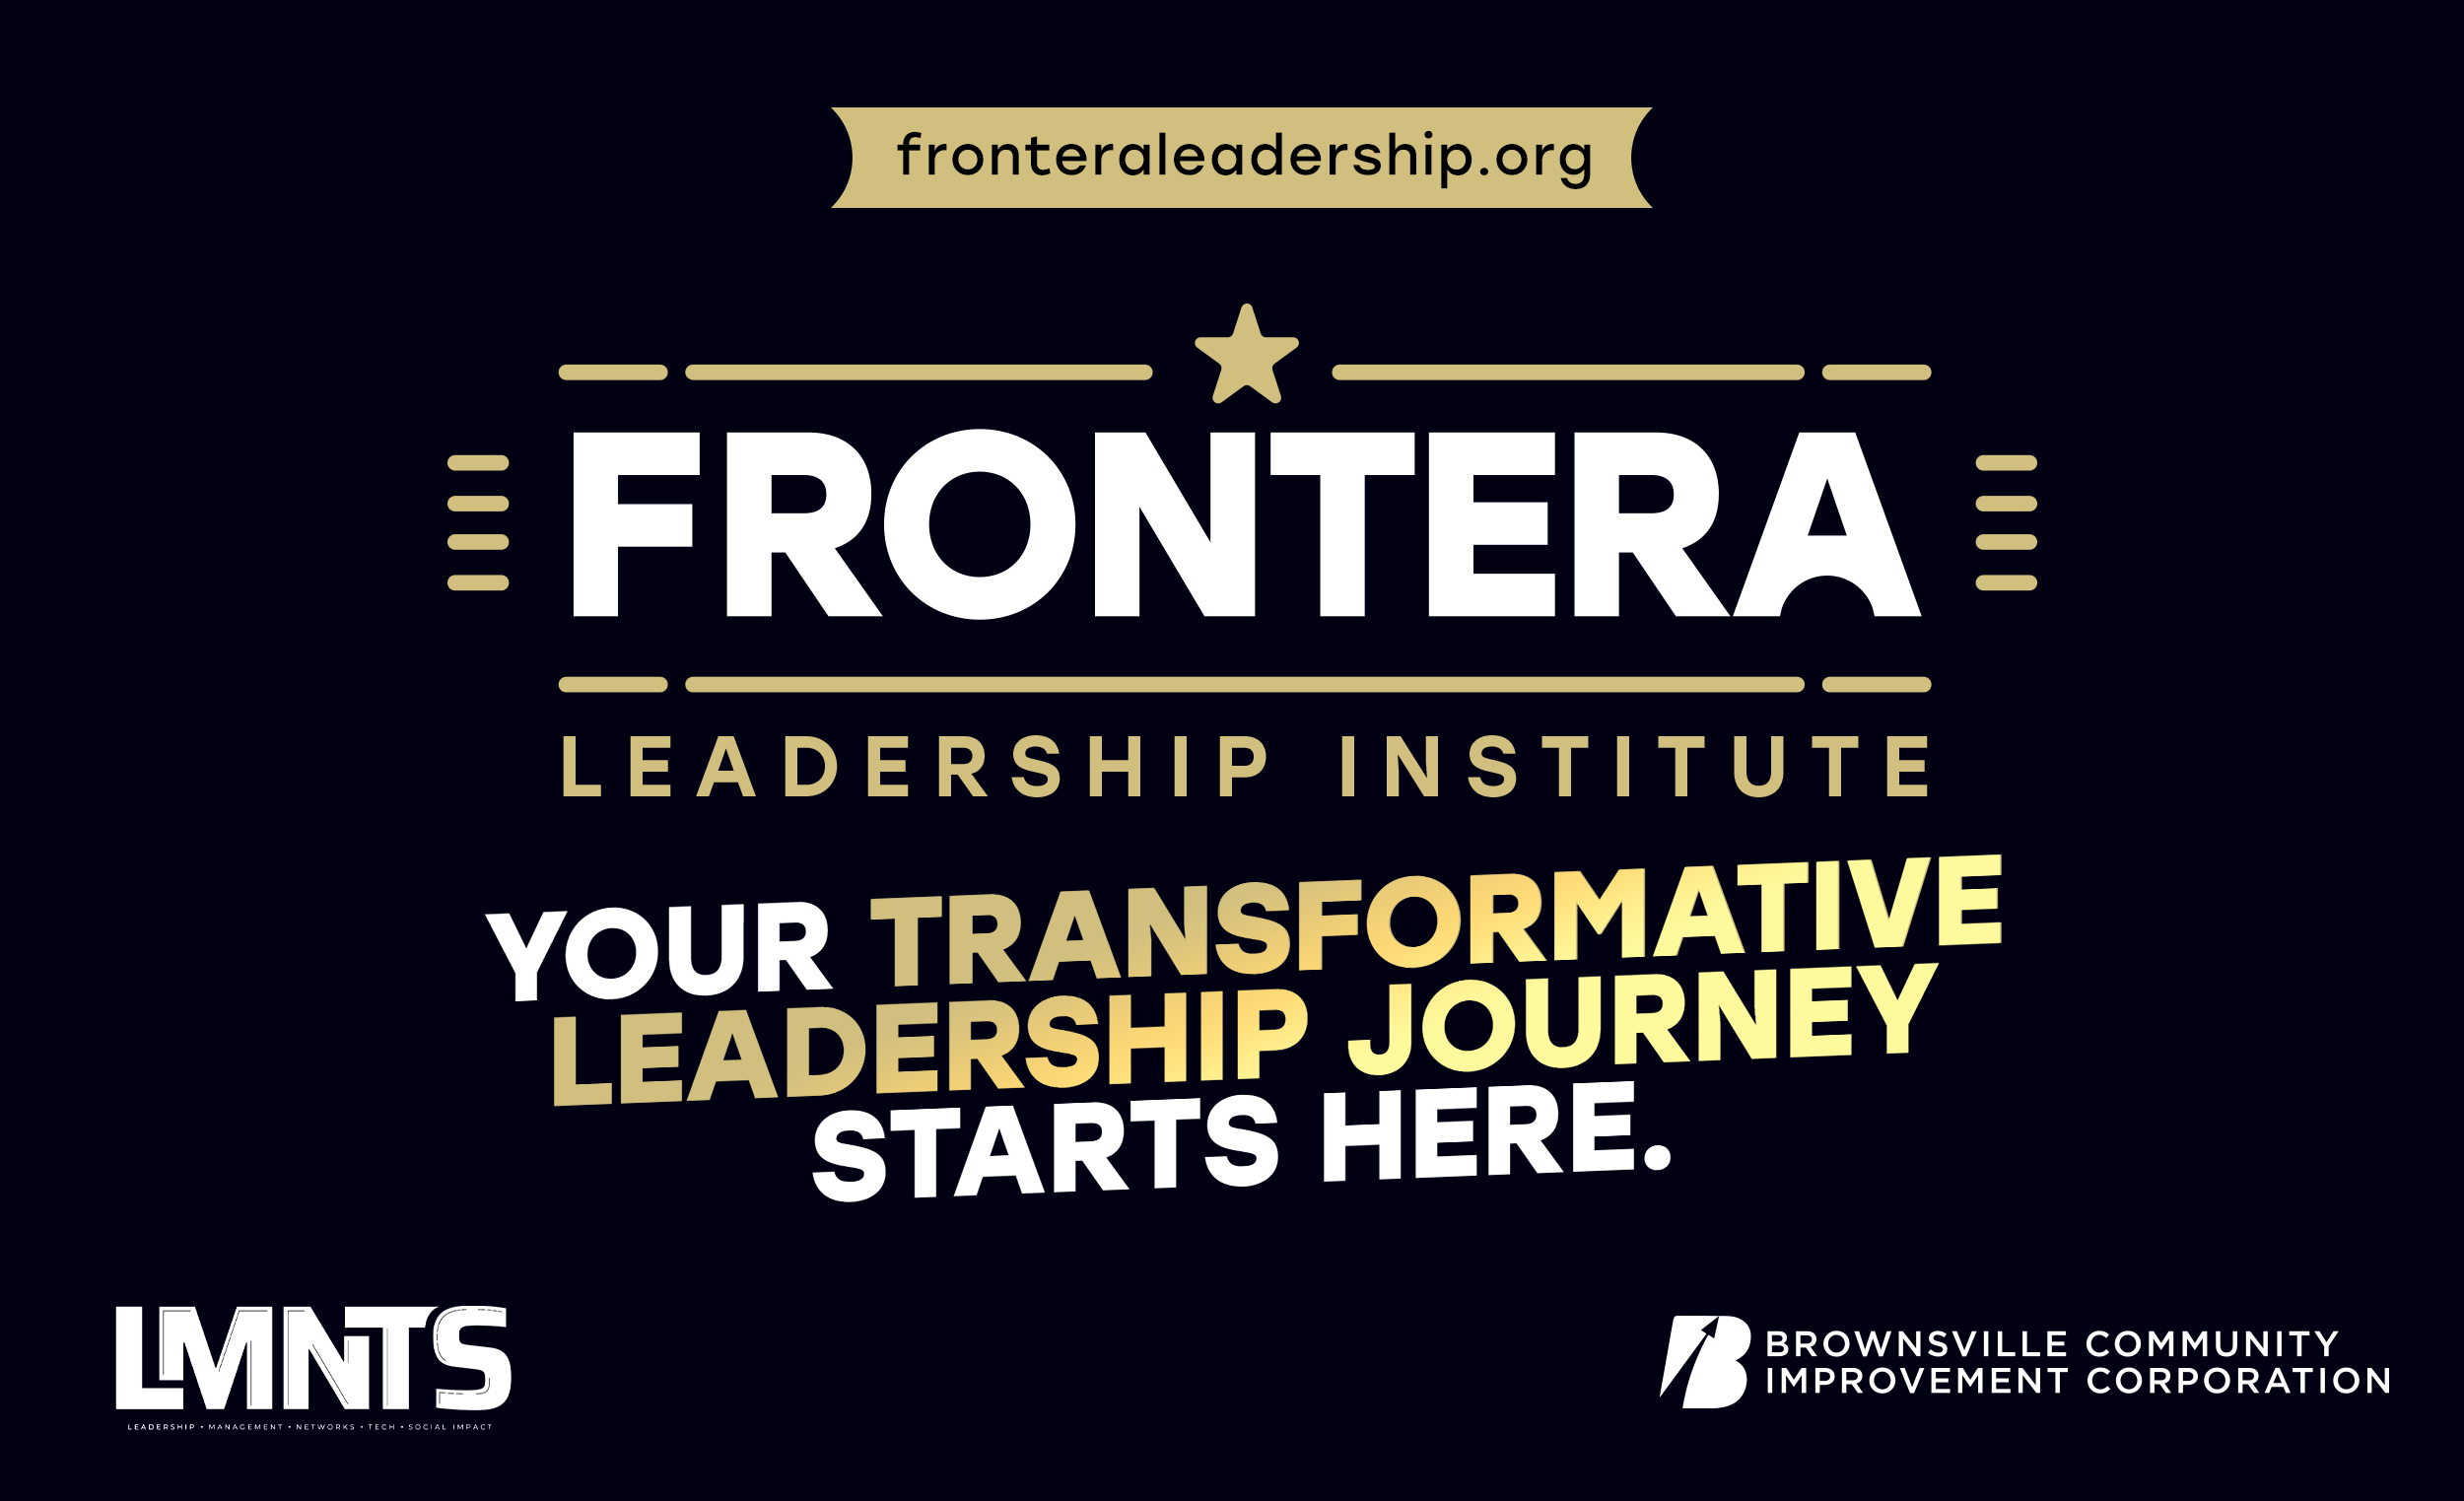 Frontera Leadership Institute: The Brownsville Community Improvement Corporation (BCIC) and LMNTS Launch a Life-Changing Leadership Program